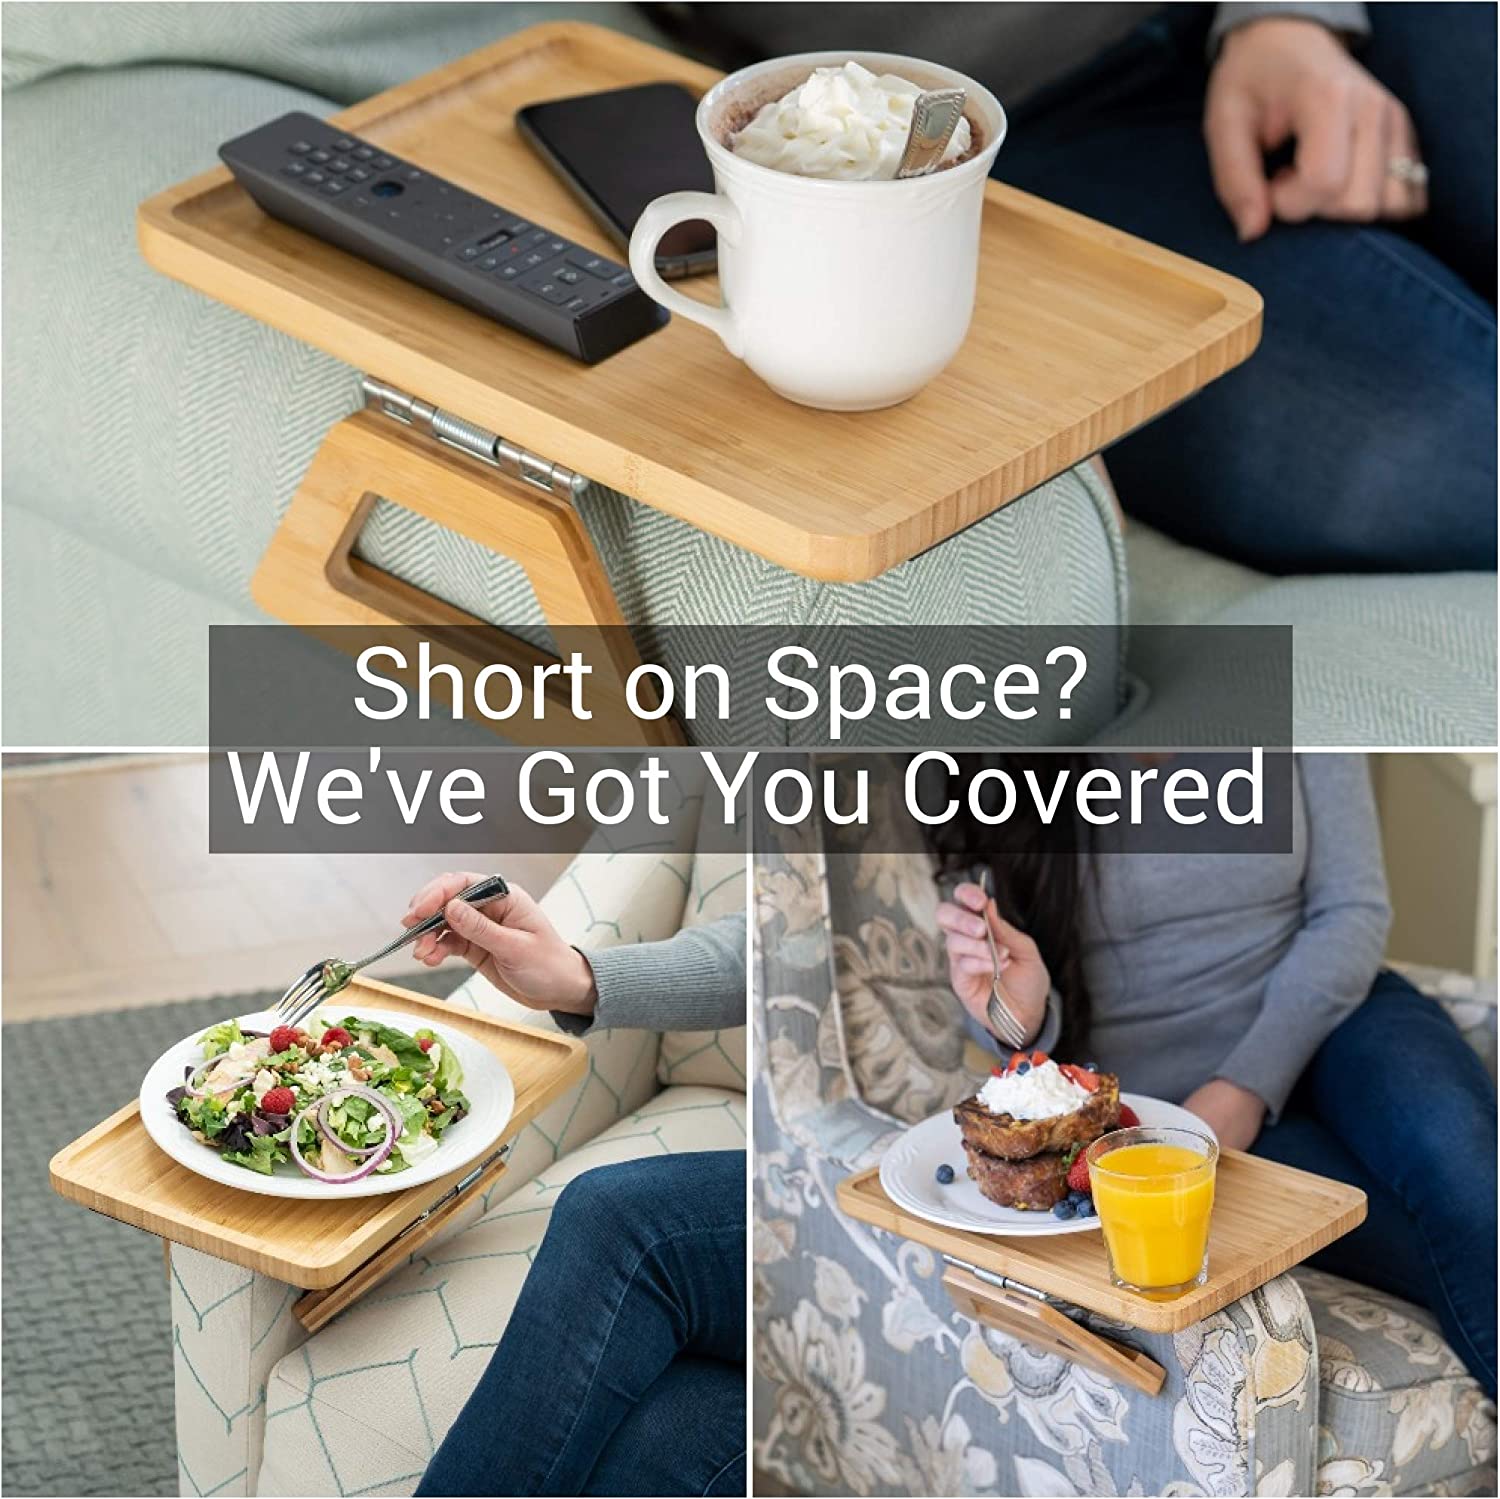 Couch Arm Tray Table, Portable Table and Side Tables for Small Spaces - waseeh.com